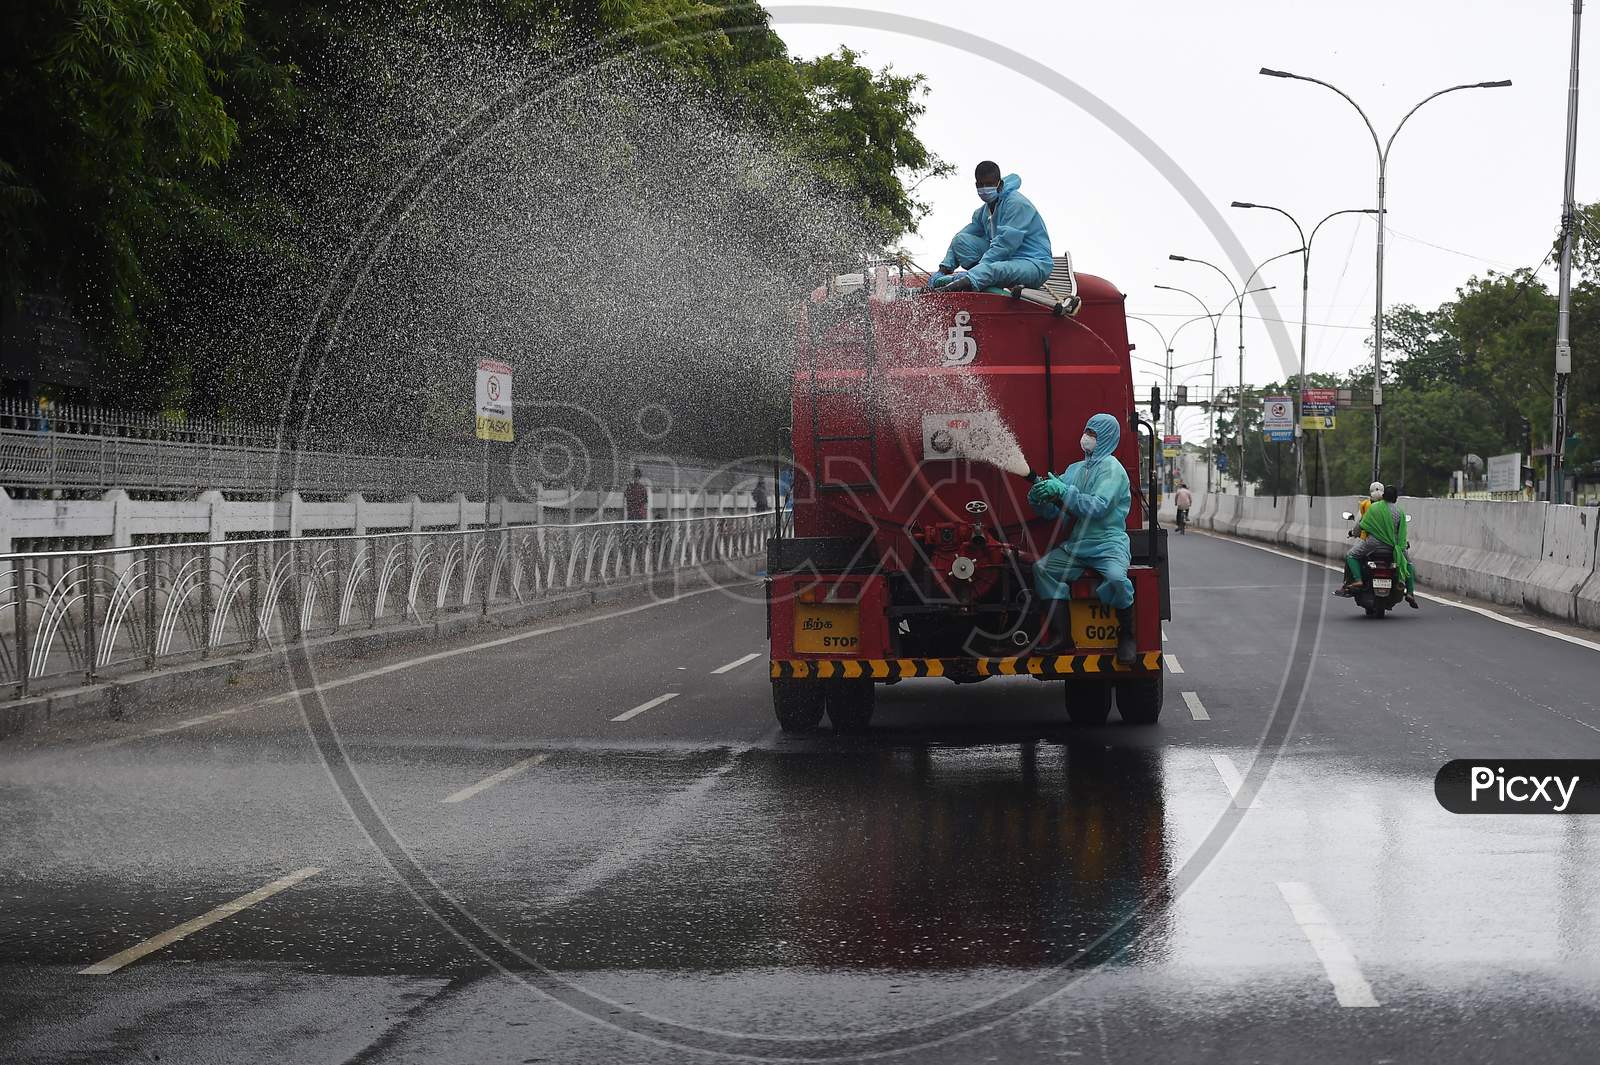 Firefighters spraying disinfectant in a containment zone as a preventive measure to contain the spread of Coronavirus in Chennai.